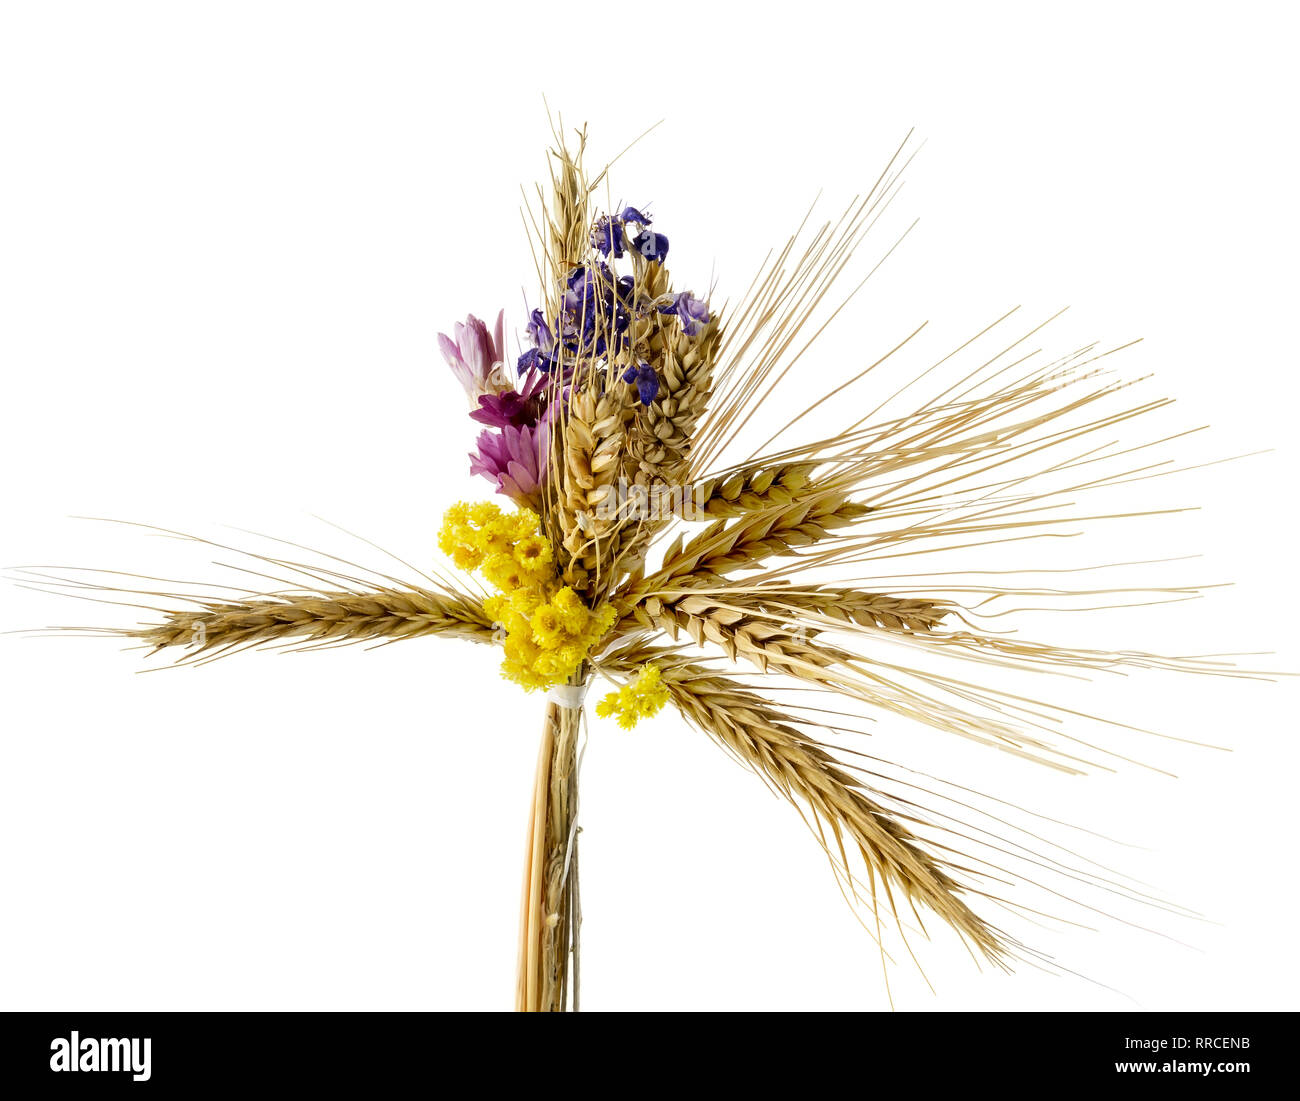 Related dried wheat ears with flowers on a white background Stock Photo